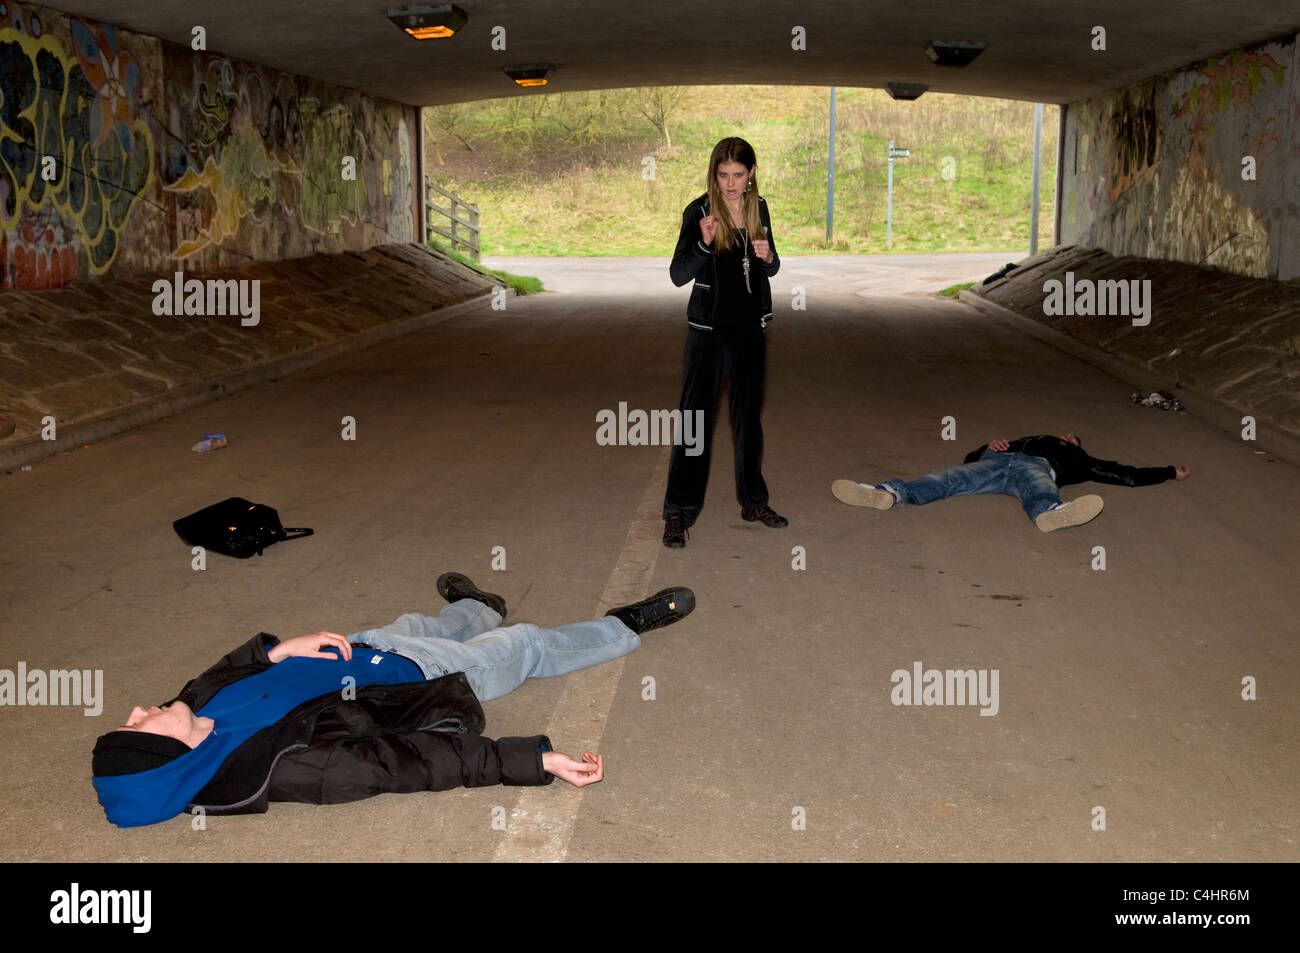 Scene showing young Caucasian woman after defending herself against two male attackers having fought off muggers in underpass Stock Photo